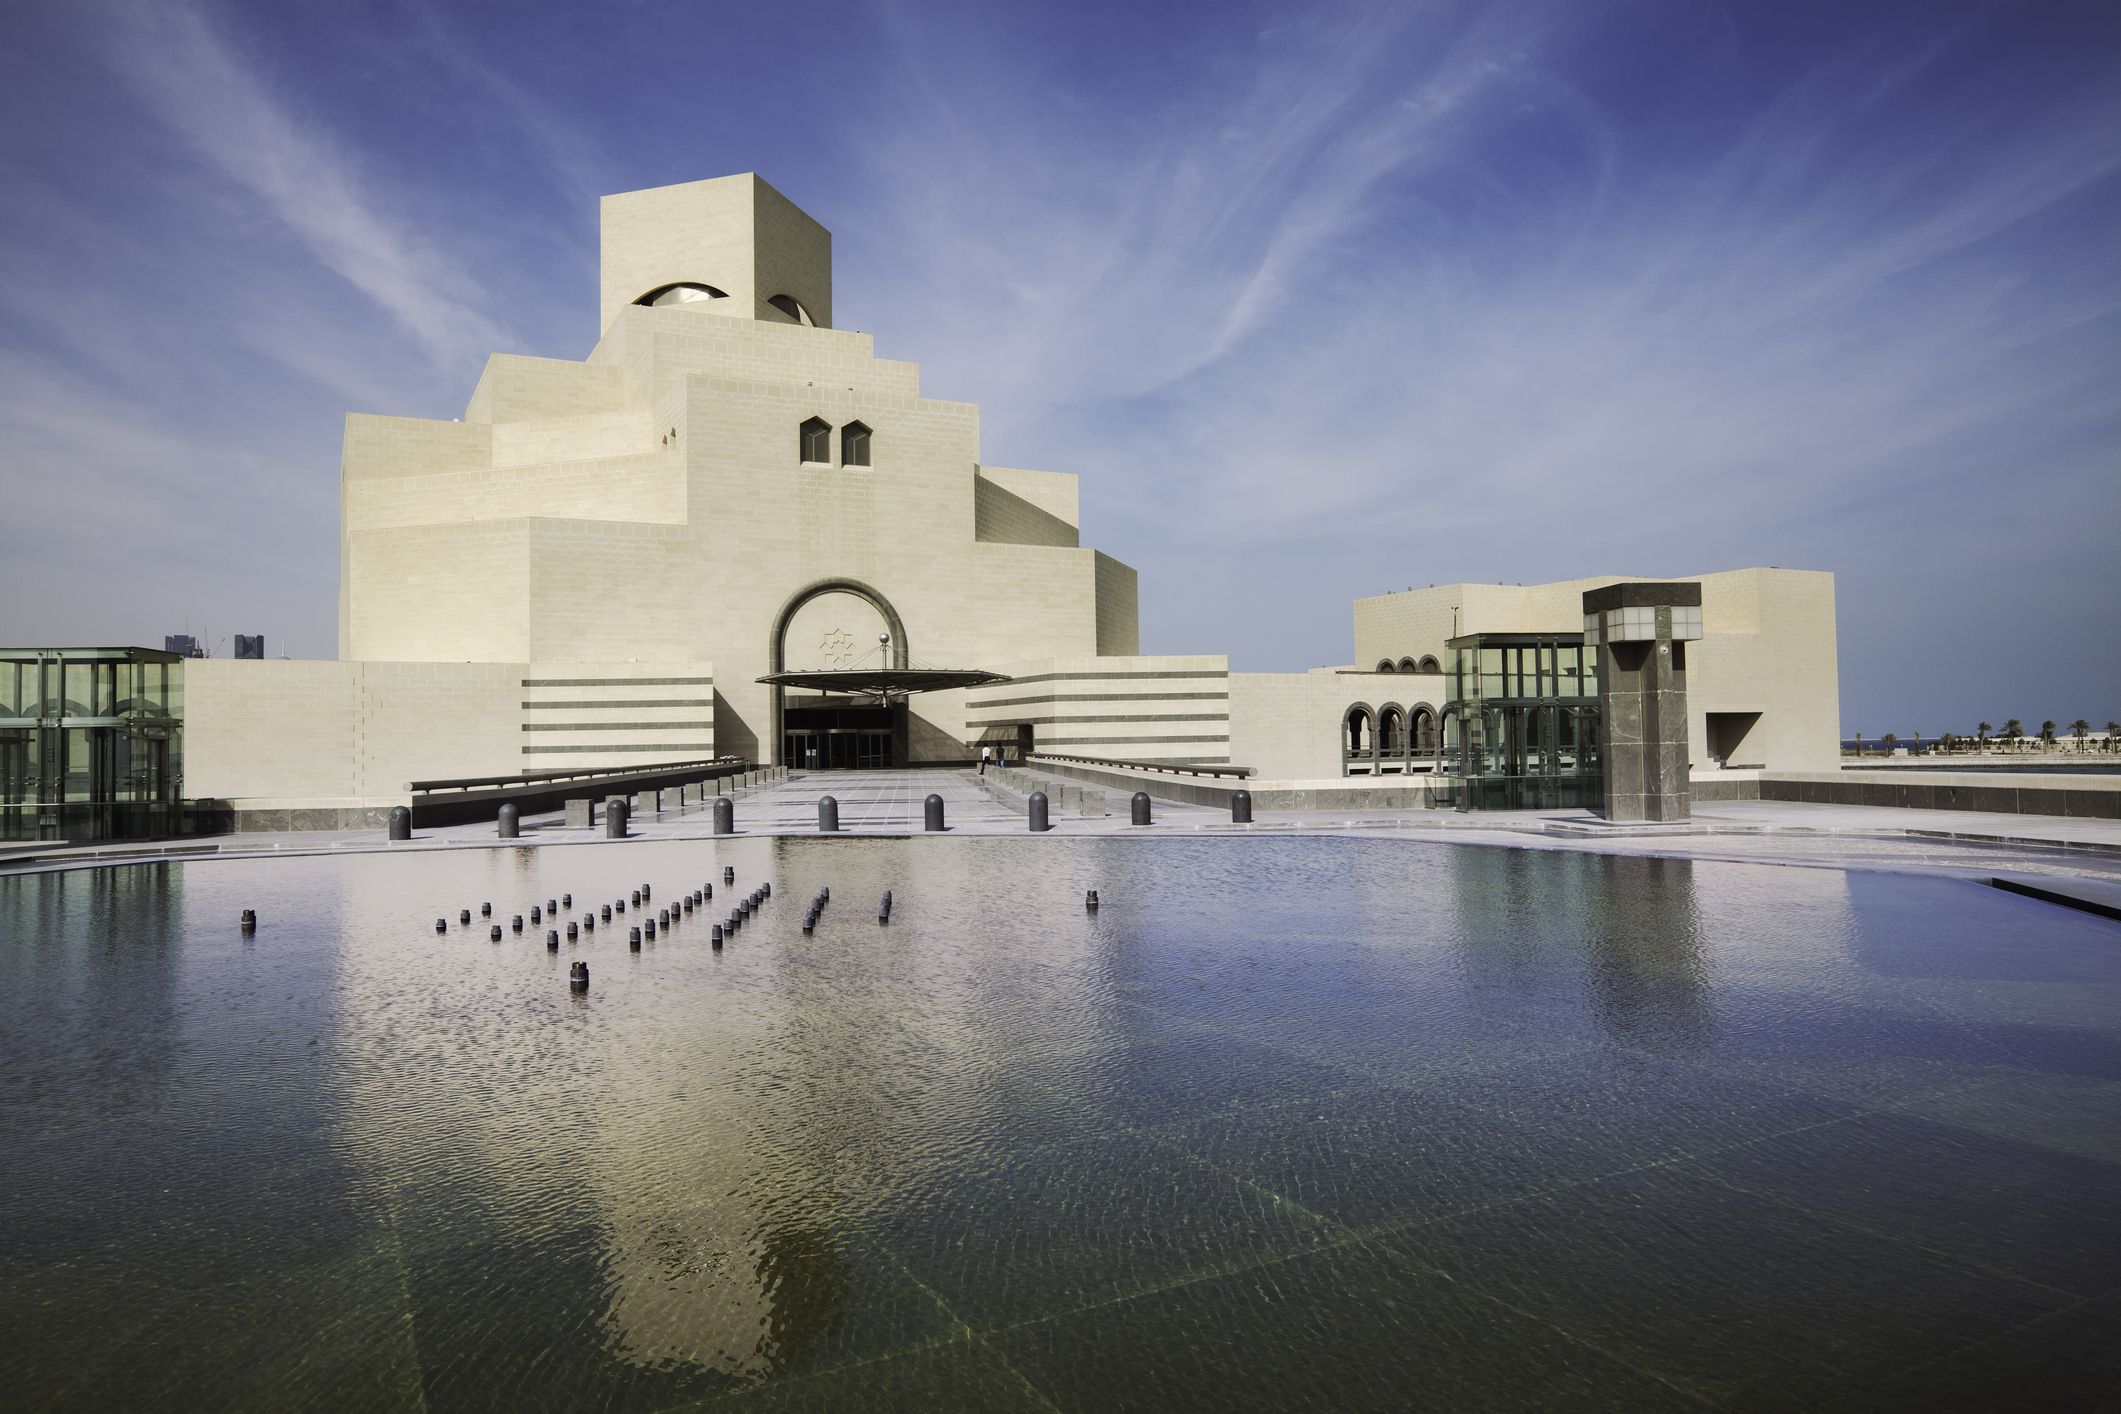 Where to see aweseome examples of I.M. Pei architecture - Lonely Planet